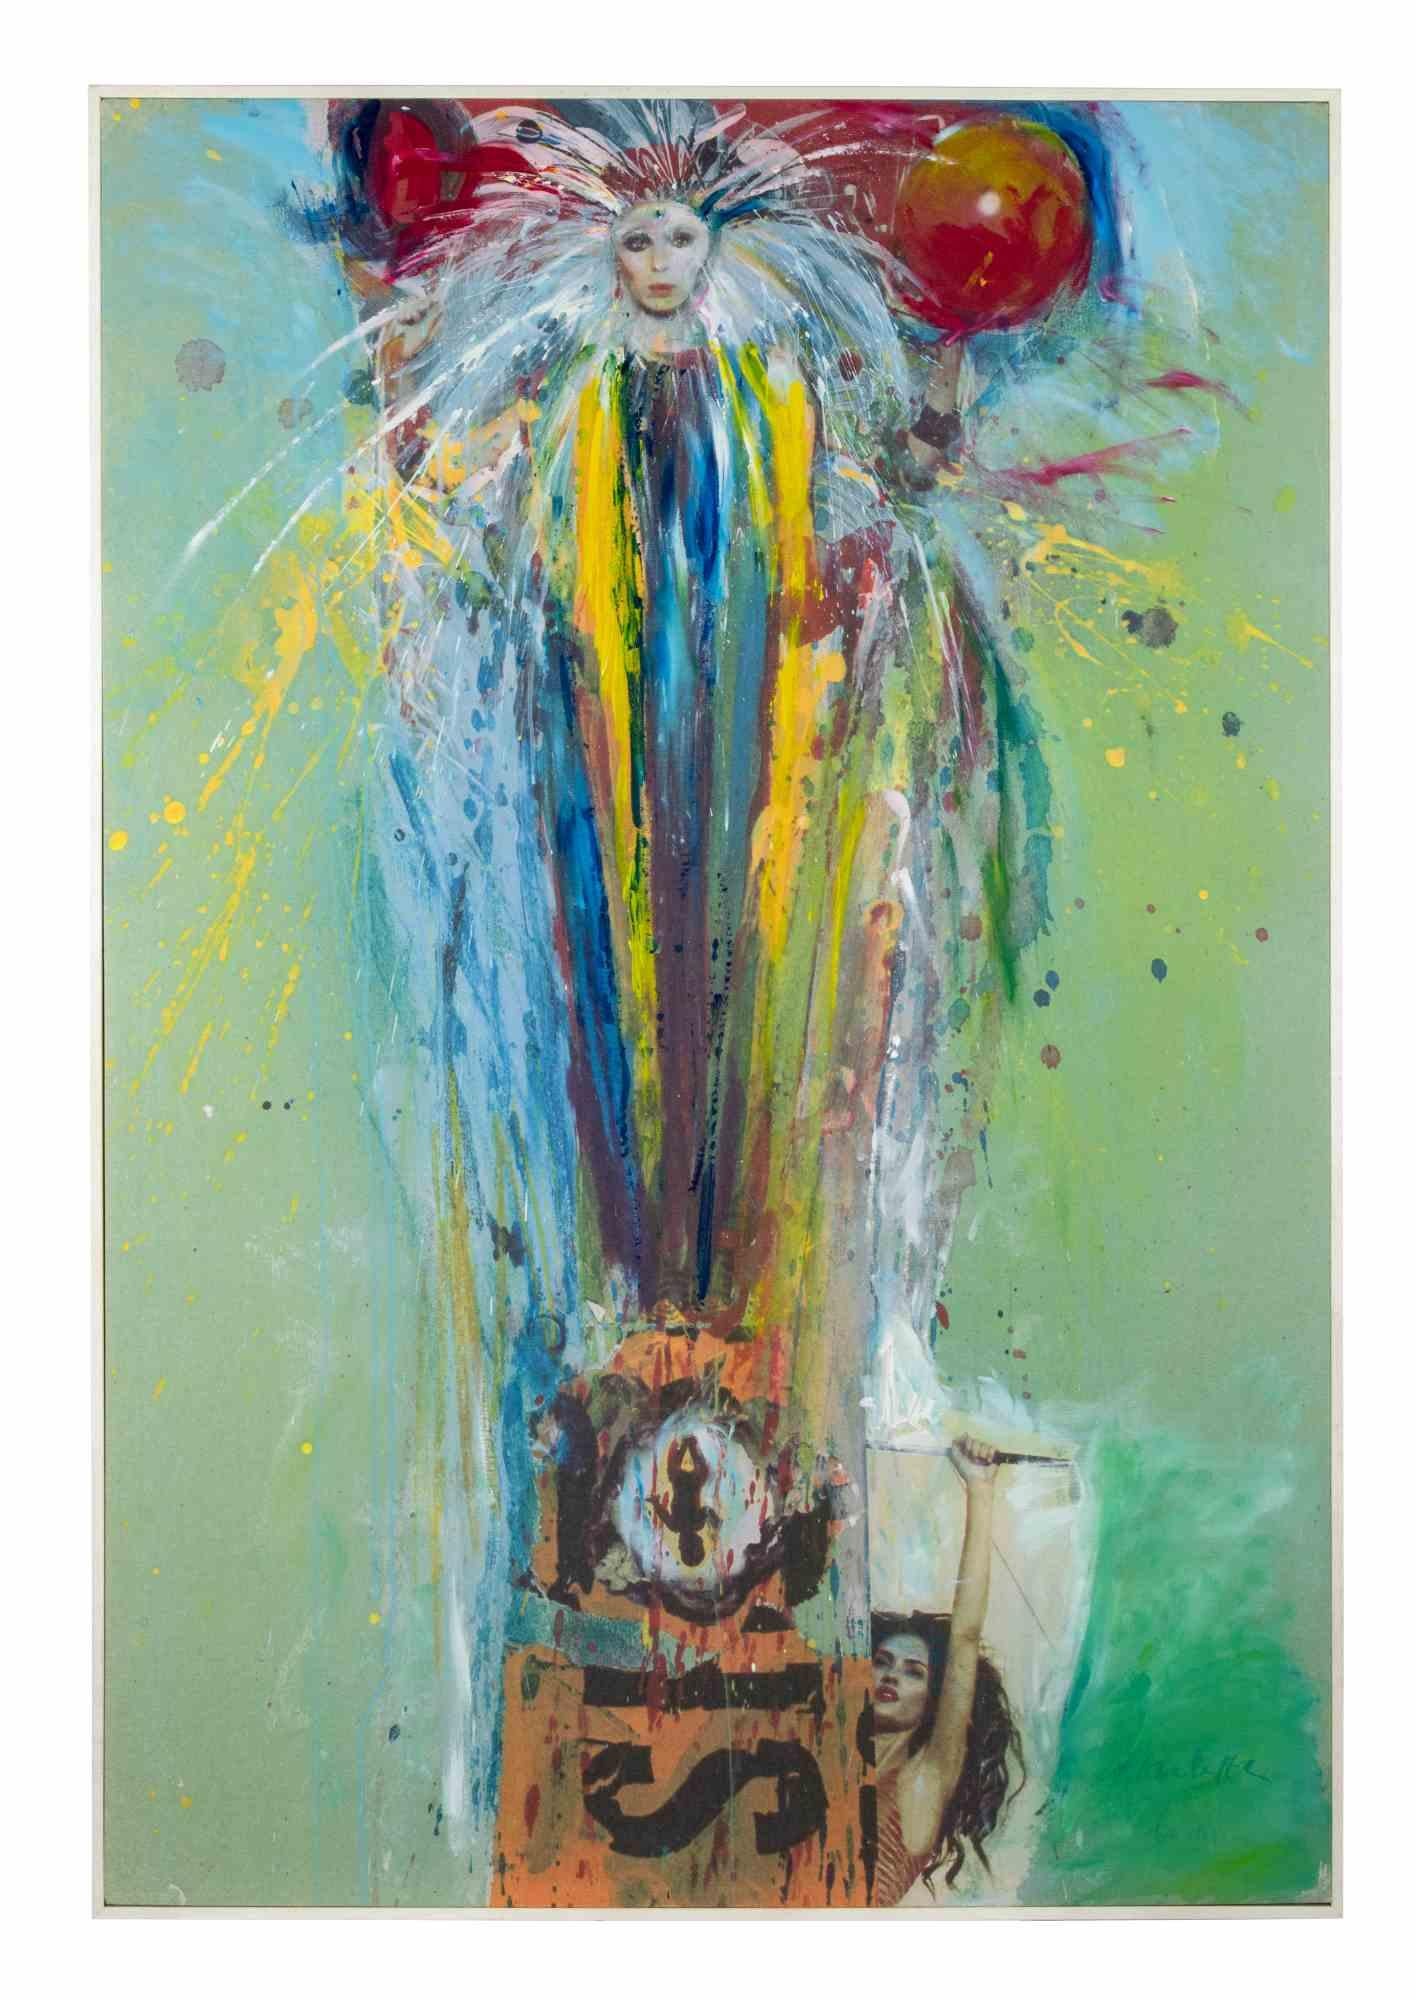 Cirque du Soleil n.24 is a contemporary artwork realized by Sergio Barletta in 1990s

Hand Signed on the lower margin.

Mixed Media (Oil and Acrylic) and collage on canvas

Includes frame: 142 x 97 cm